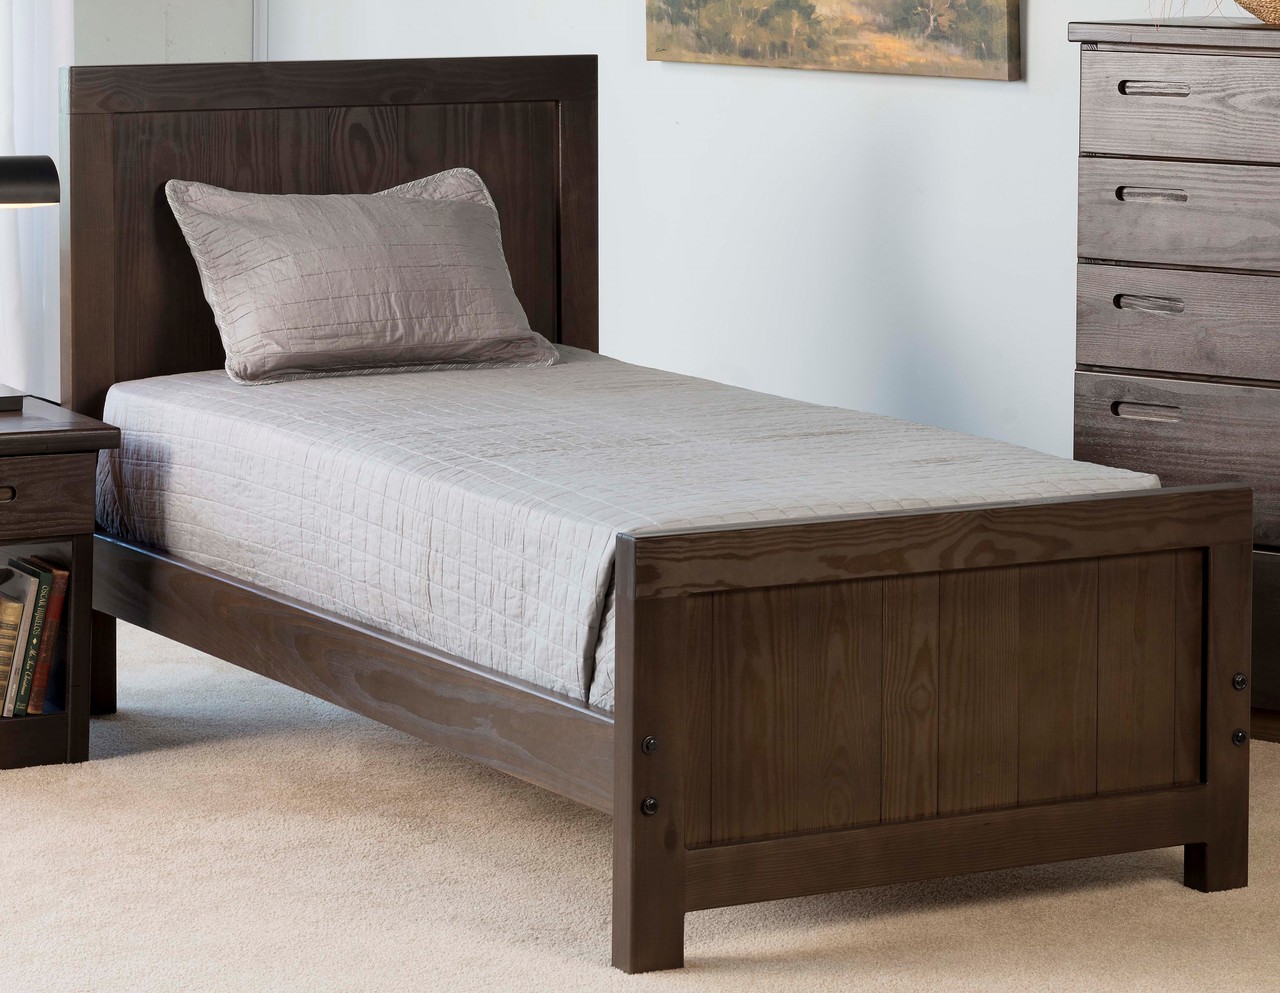 complete twin xl bed frame and mattress set